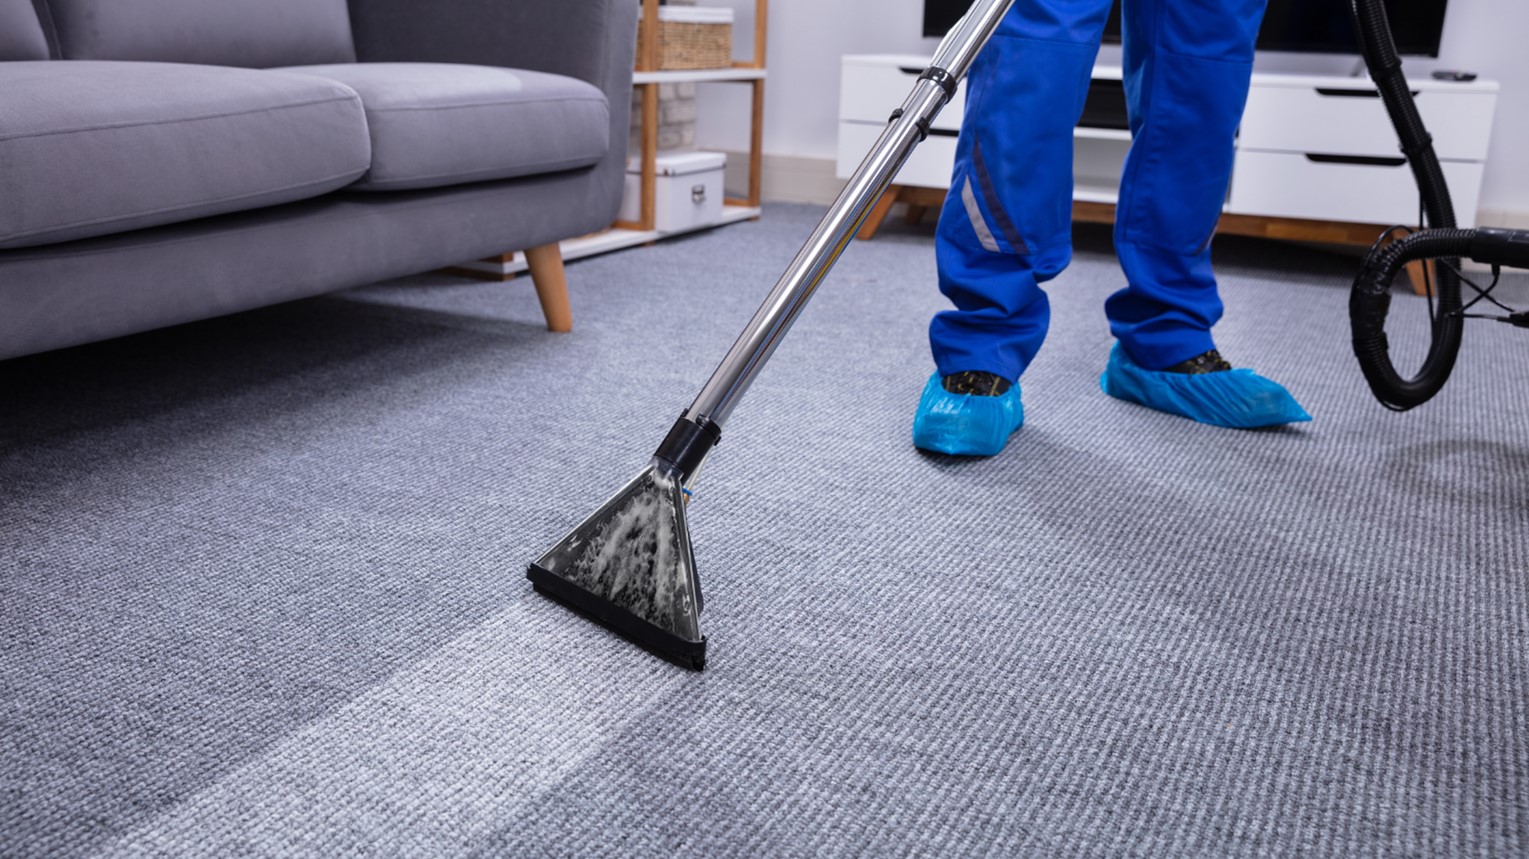 Janitorial Services in Olathe